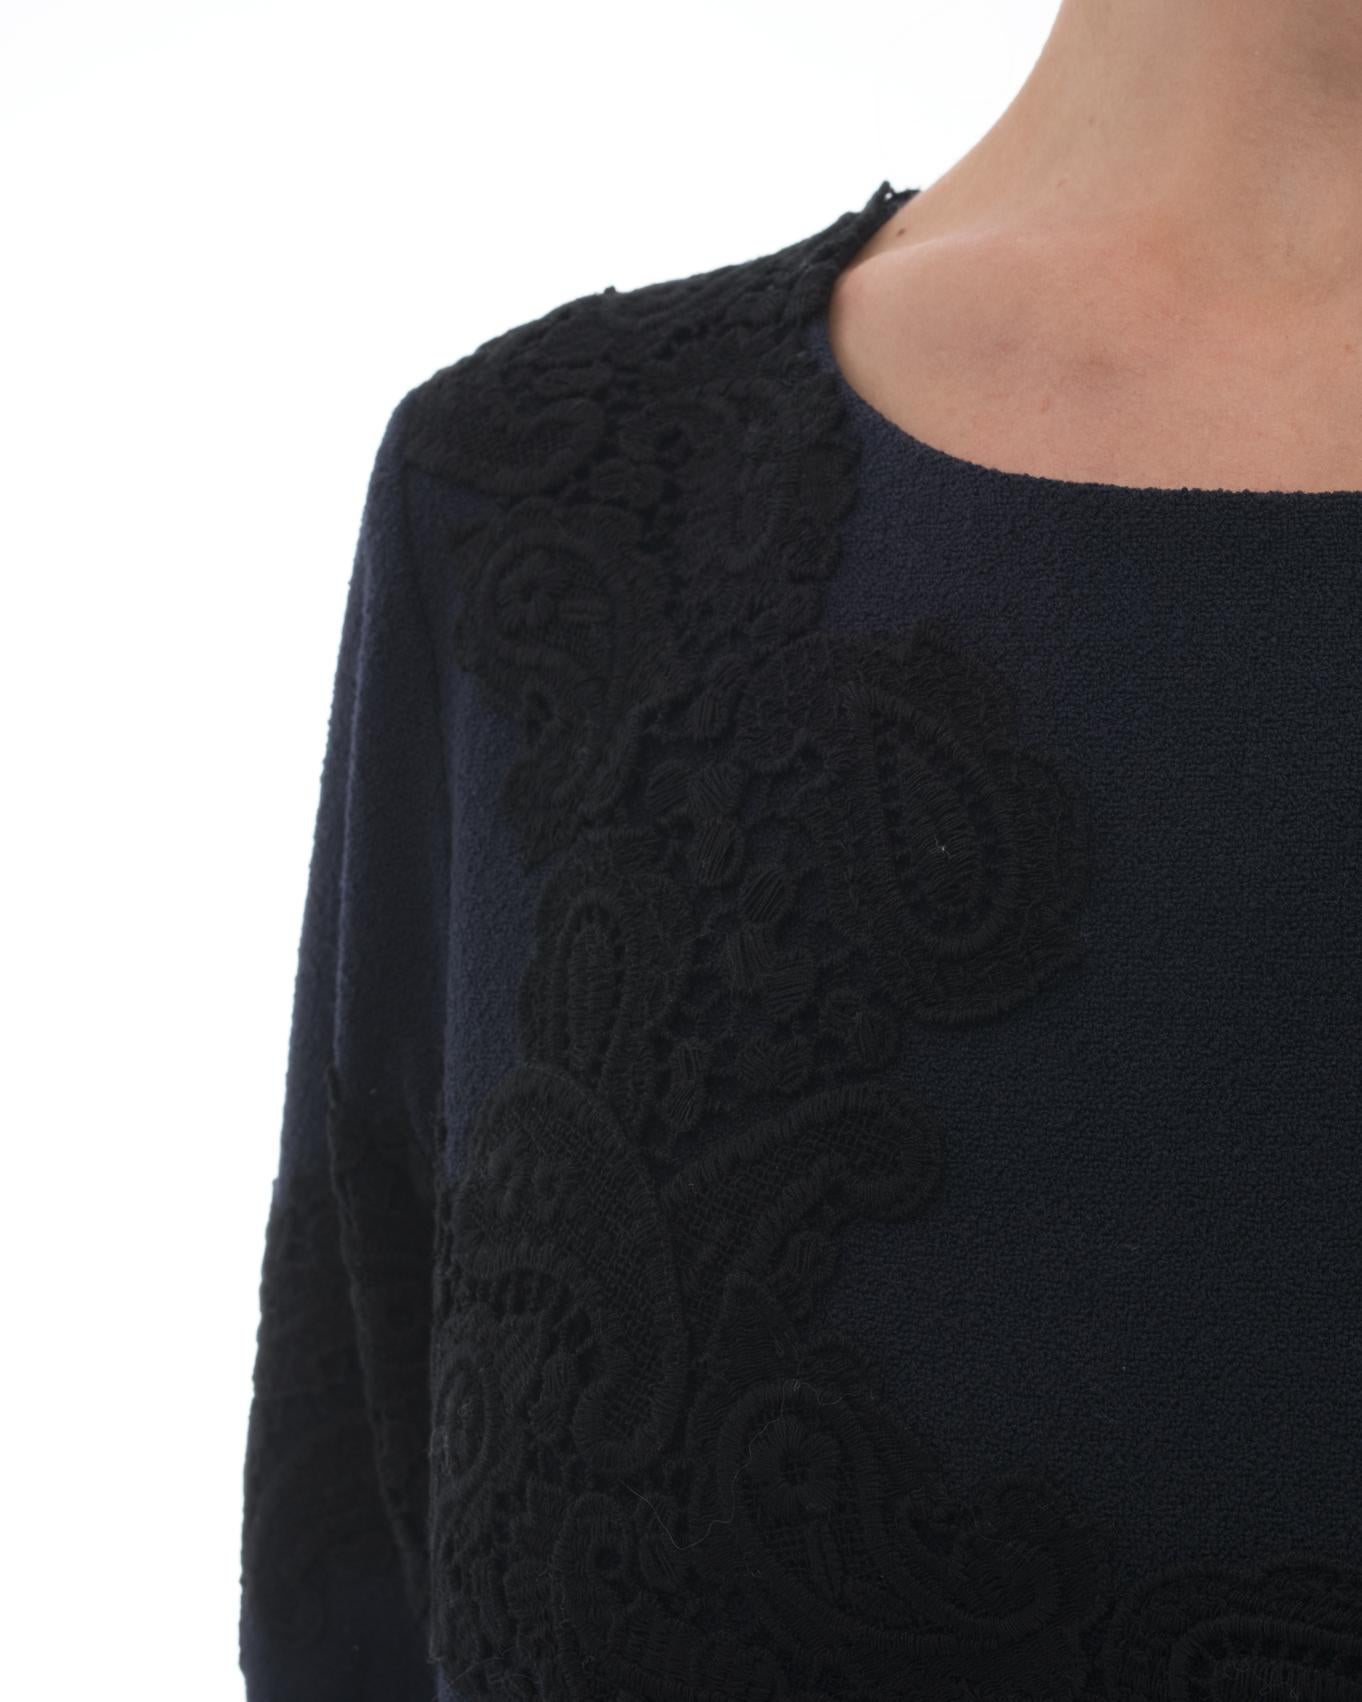 Chloe Navy Wool Long Sleeve Dress with Black Lace - 6 1